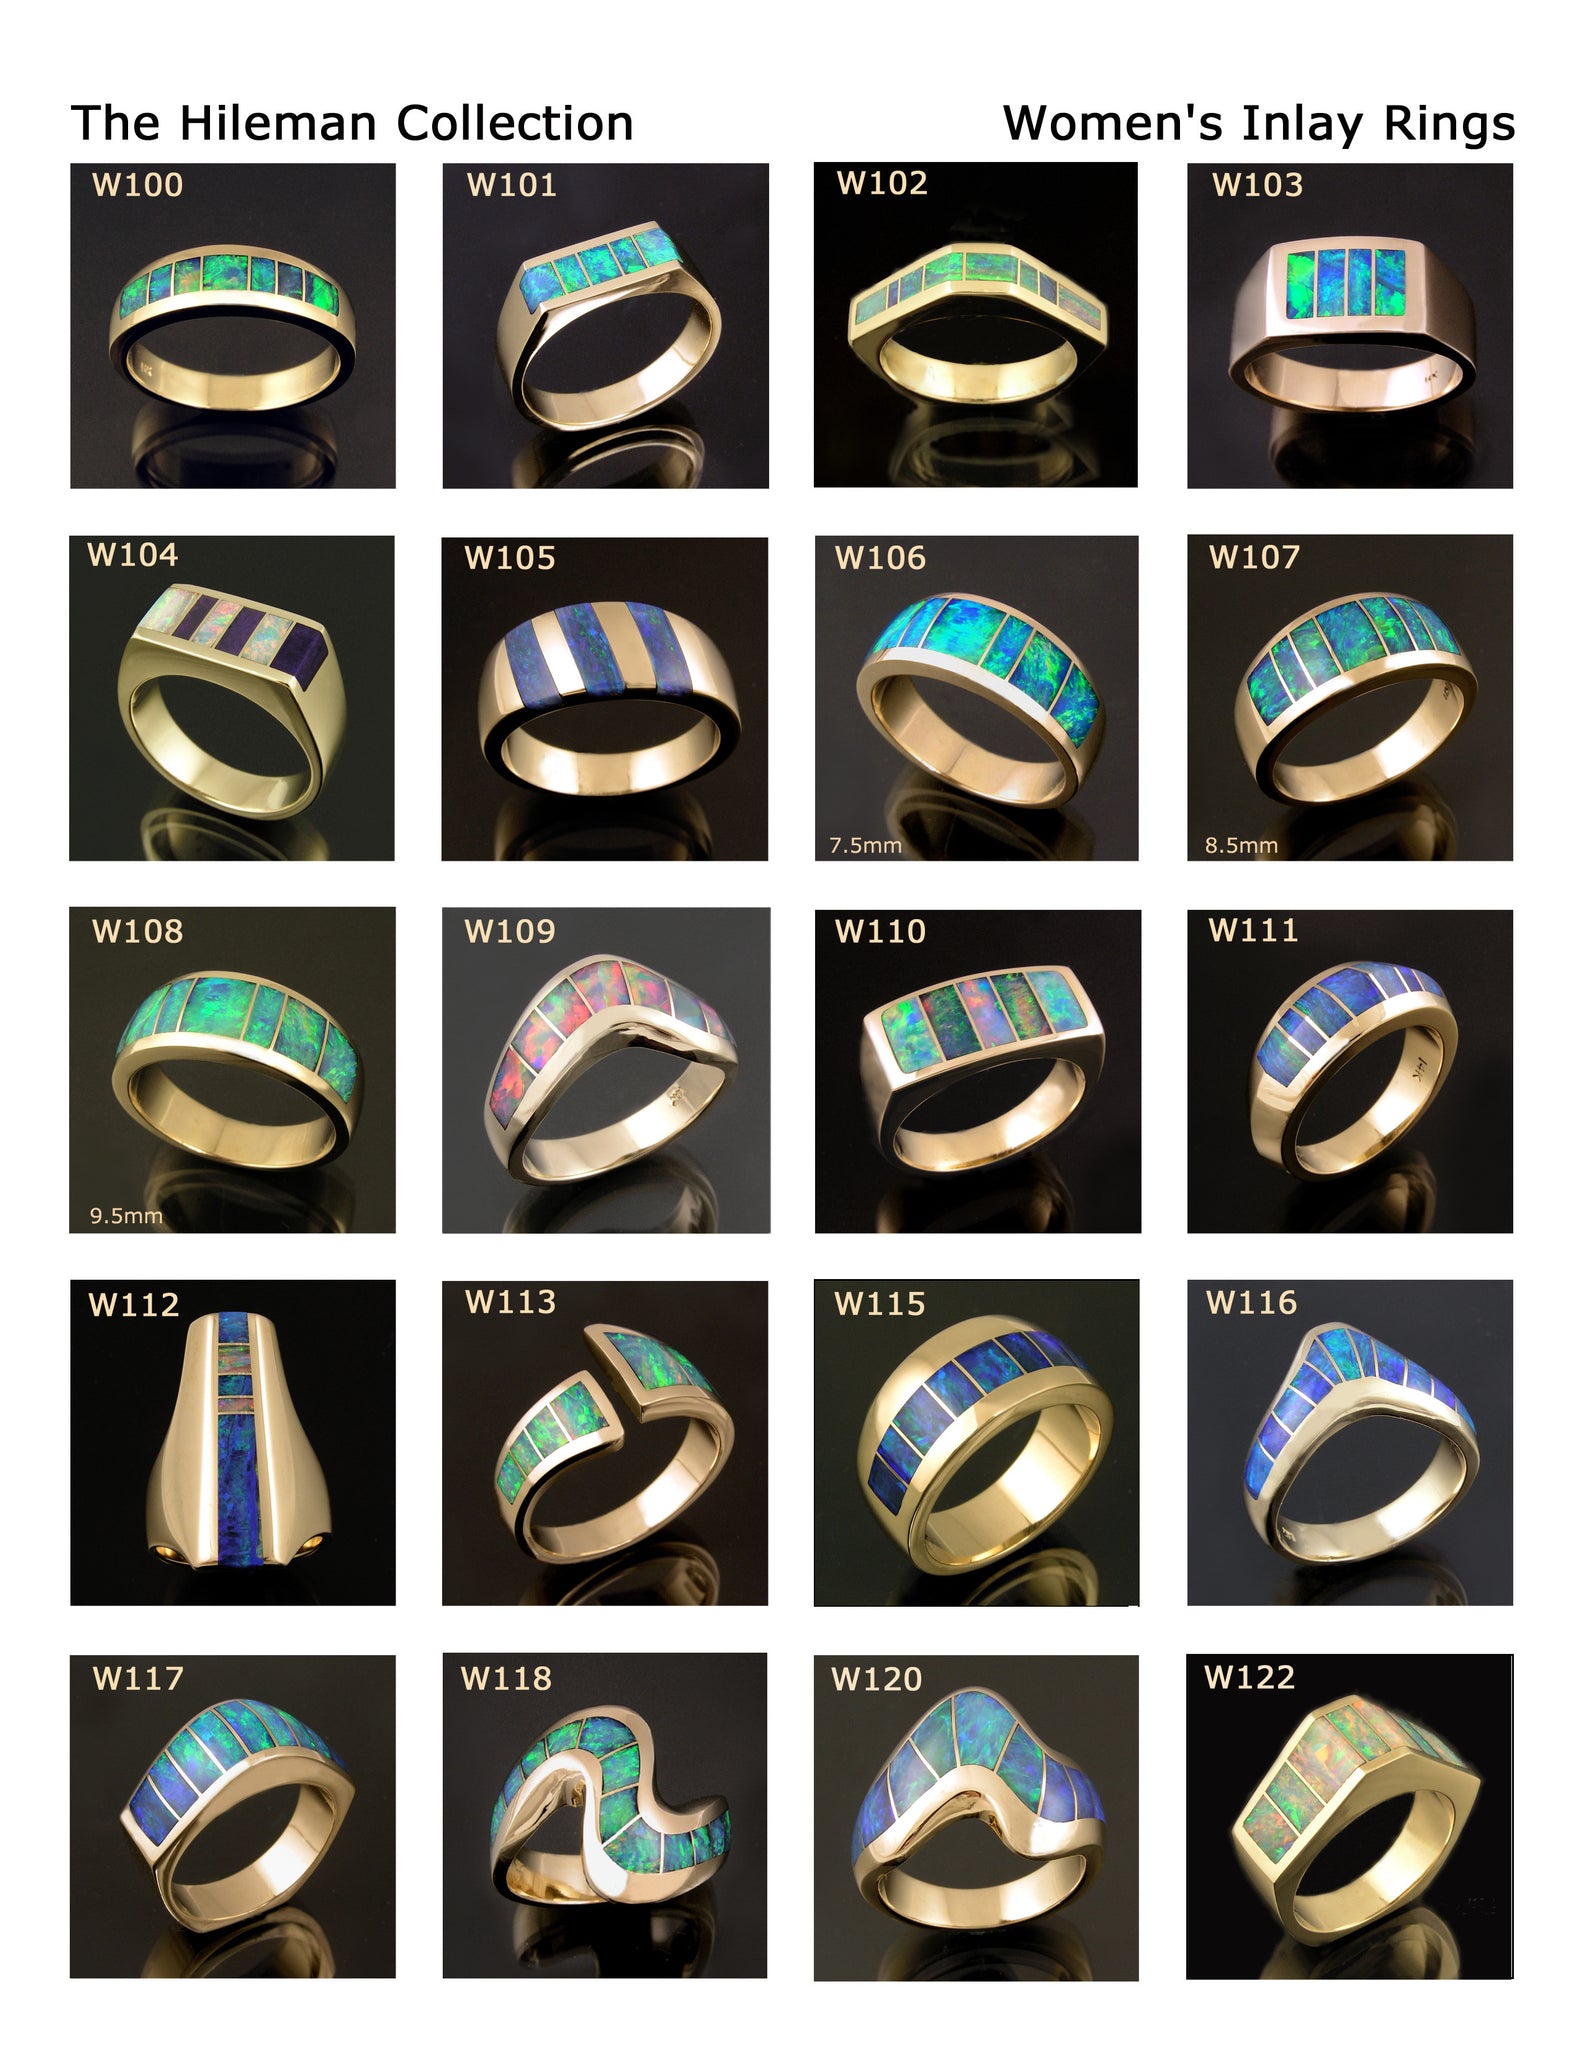 Women's Opal Rings and Wedding Rings by The Hileman Collection